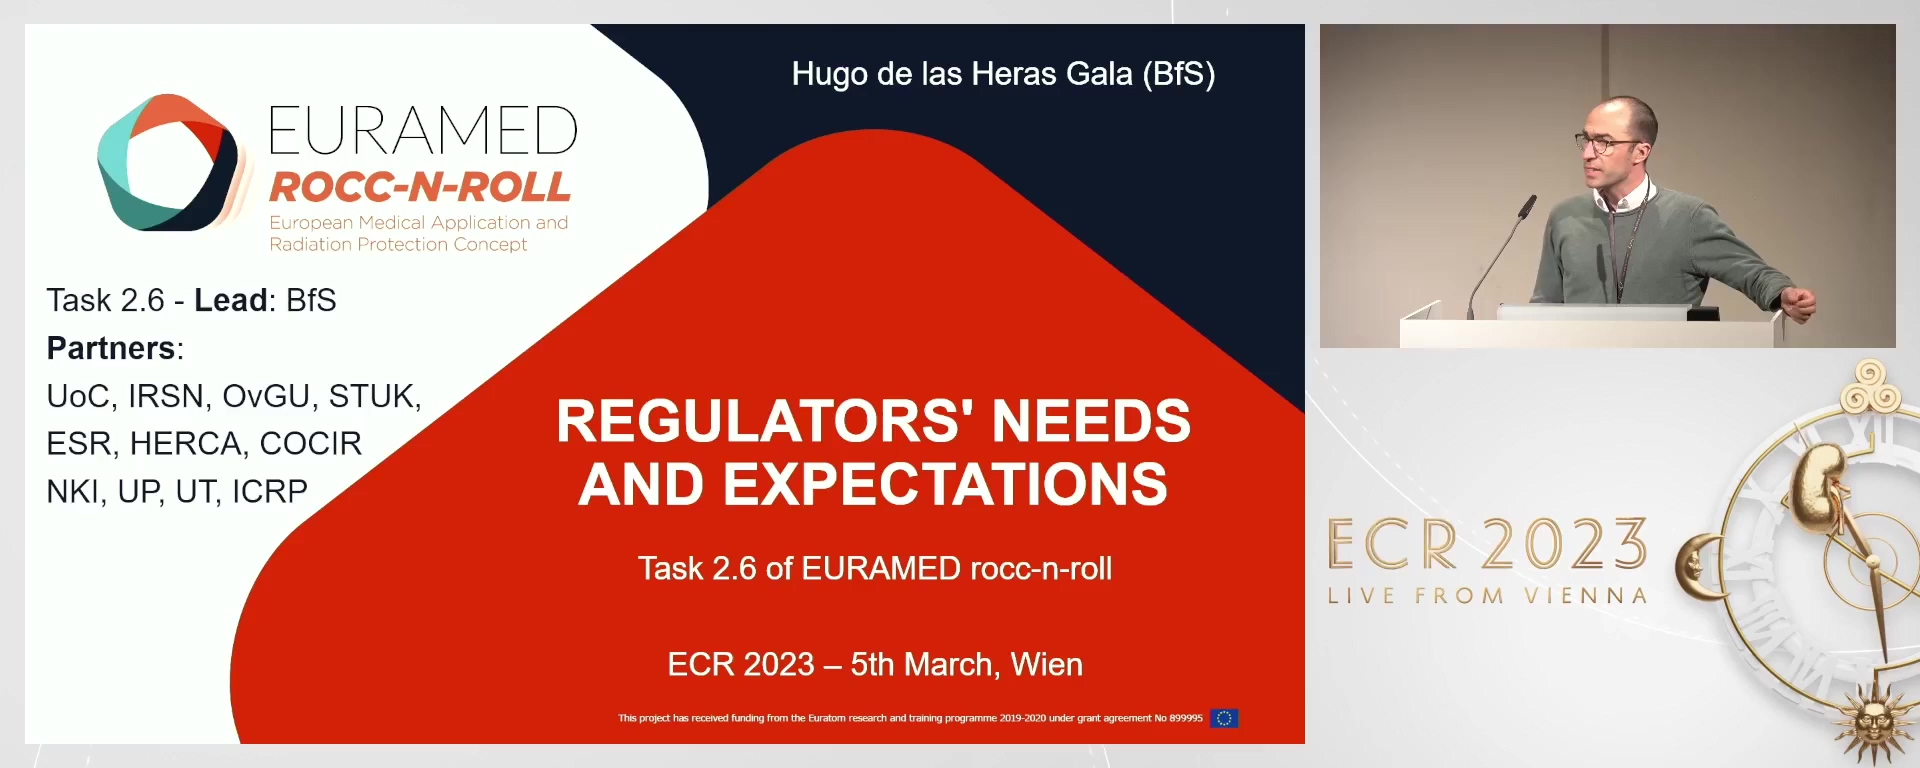 Expectations and needs of regulators